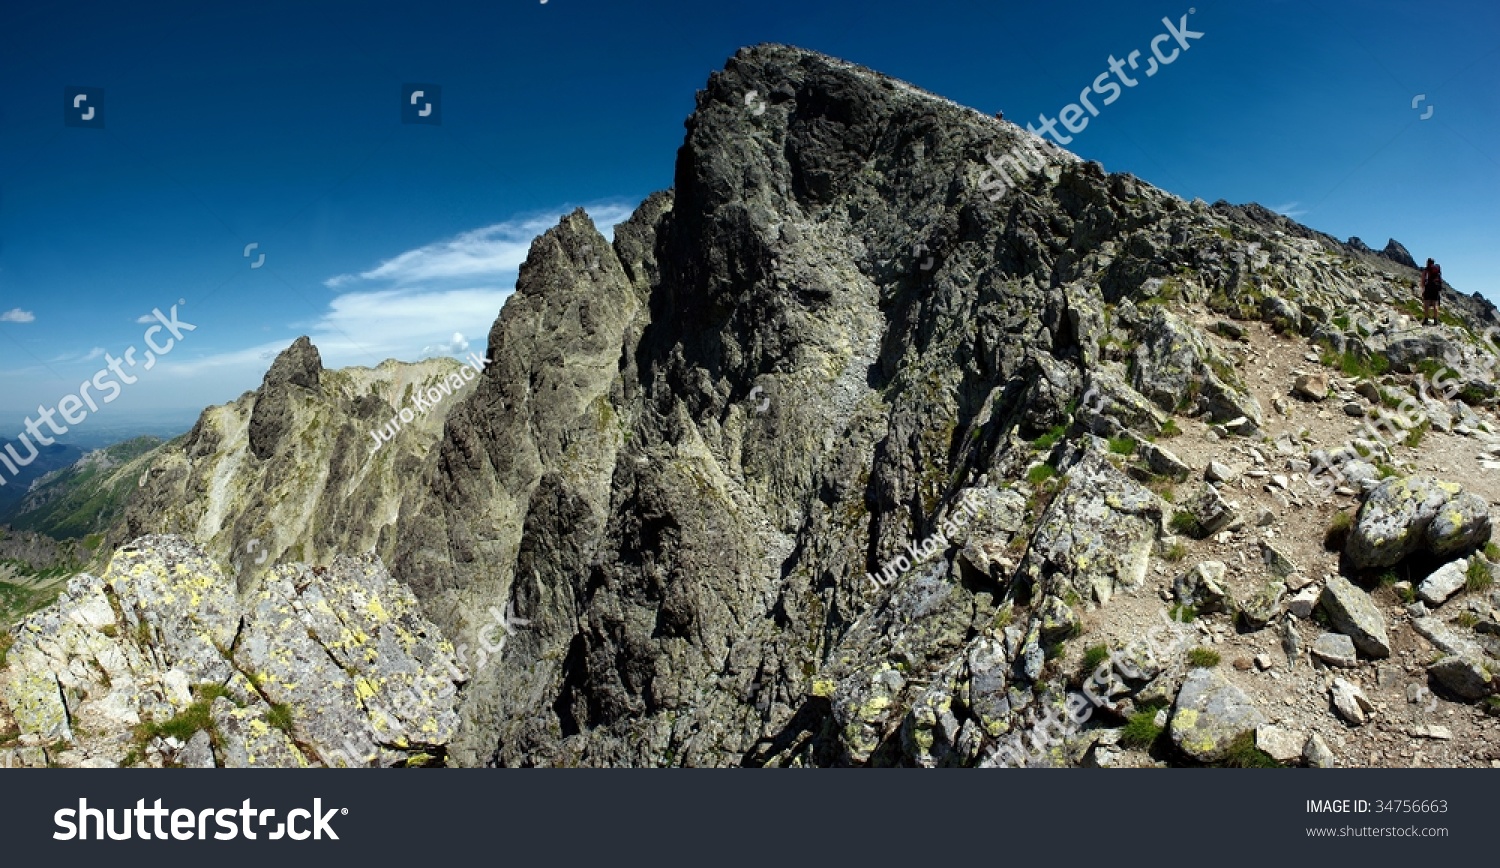 Sharp Mountain Peak With A Hiker, Sunny Day With Blue Sky Stock Photo ...